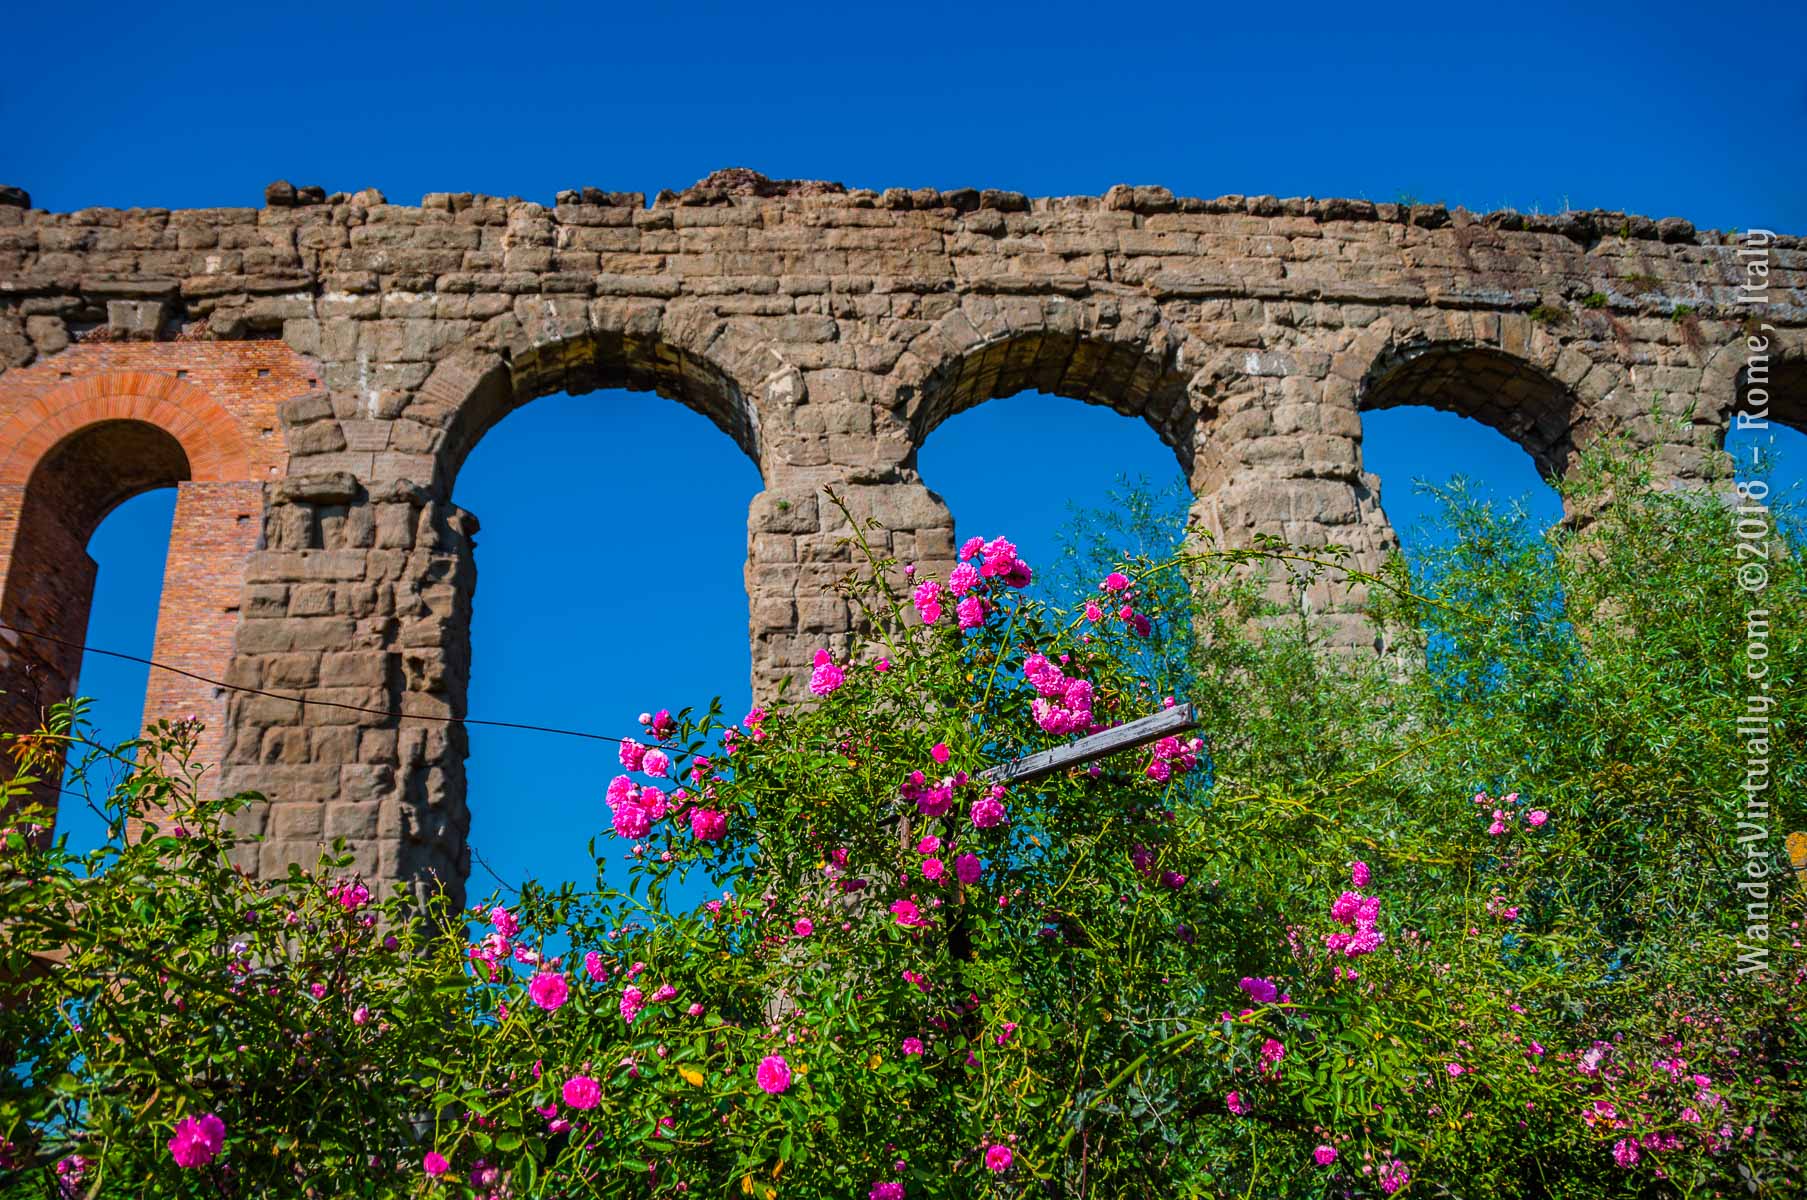 The aqueducts Claudia (38-52 CE) and Anio Novus (47-52 CE) channeled above these arches across Rome. Ancient Romans learned this engineering skill from Etruscans.